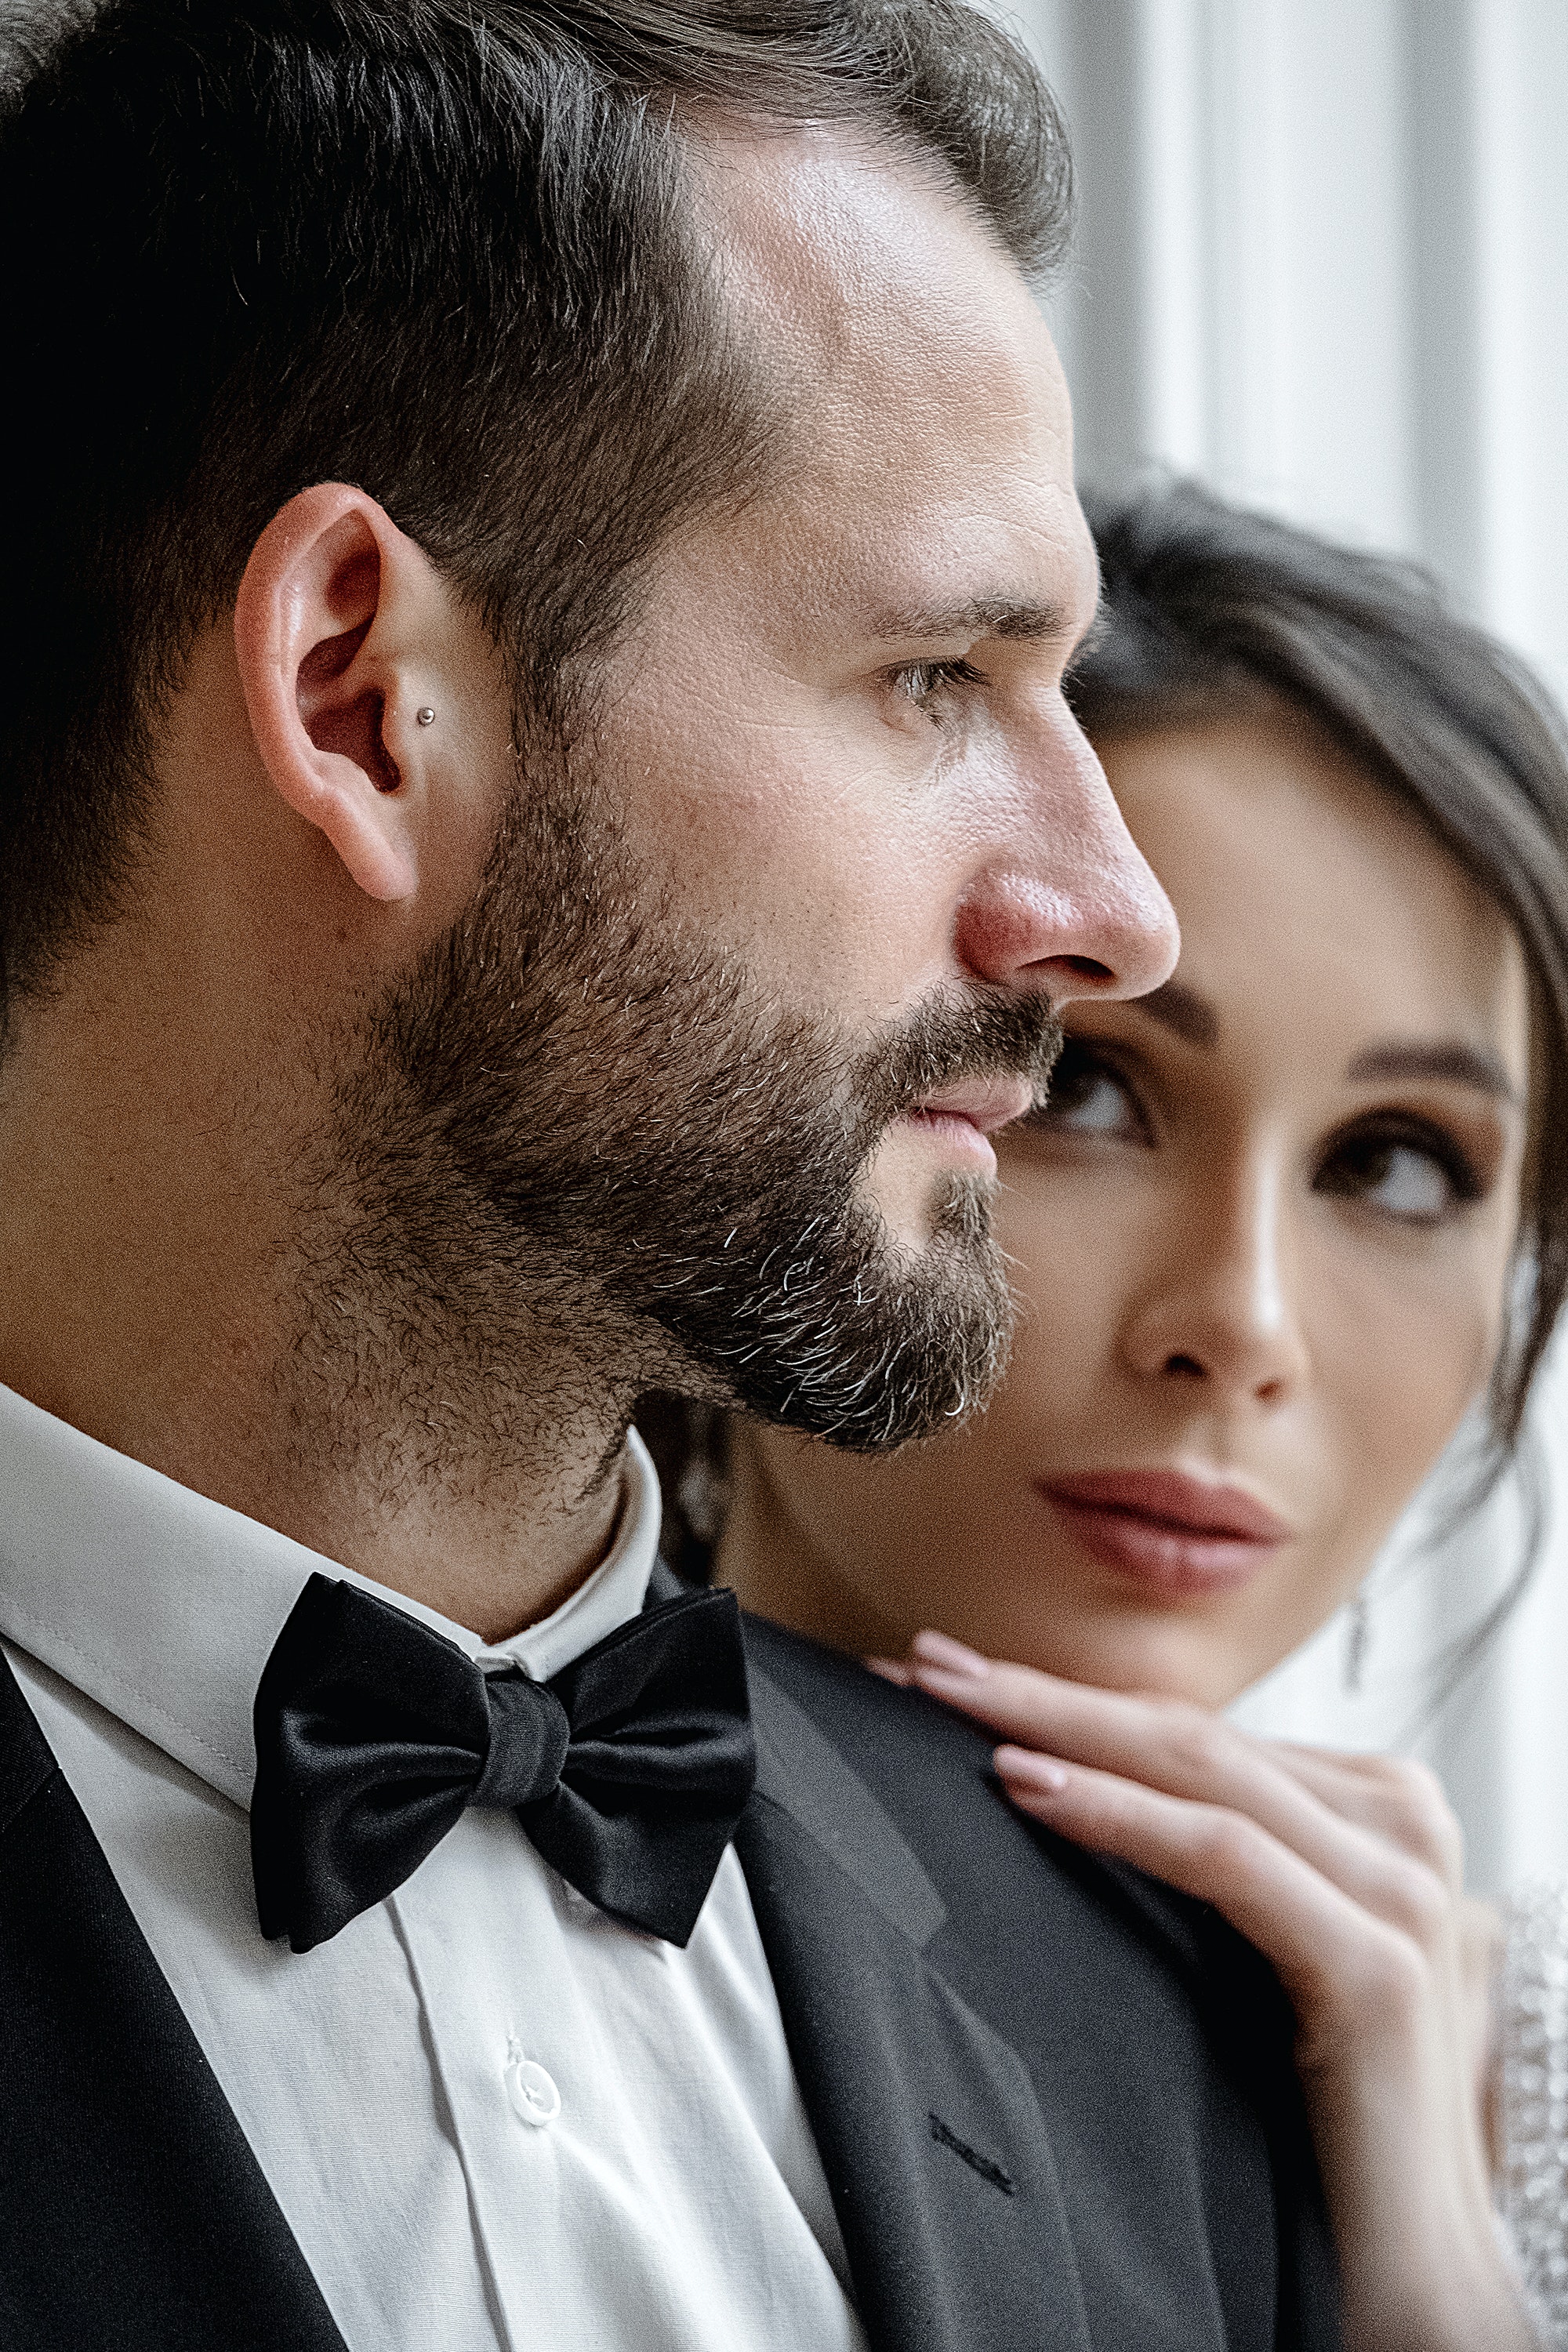 Guy Well Groomed Bearded Hipster Wear Tuxedo. Hairstyle and Beard Grooming.  Barber Shop Concept Stock Photo - Image of designer, tailor: 167192900